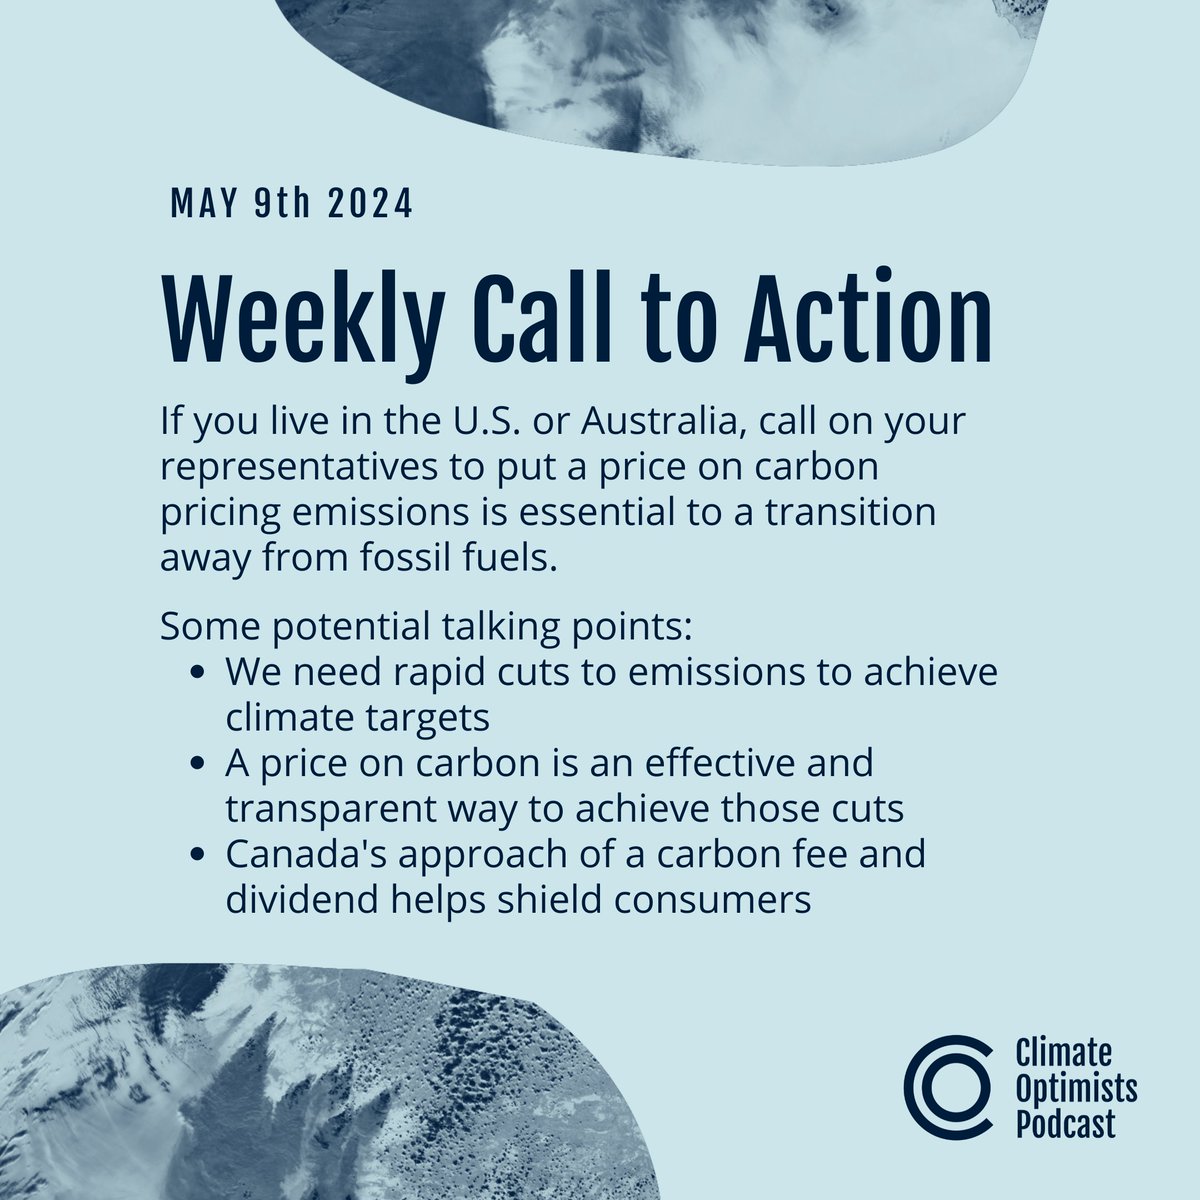 This week's call to action is calling for an end to fossil fuels! Help aid this transition by calling your representatives. #happy #calltoaction #climateoptimists #podcast #climatechange #electricvehicles #fossilfuel